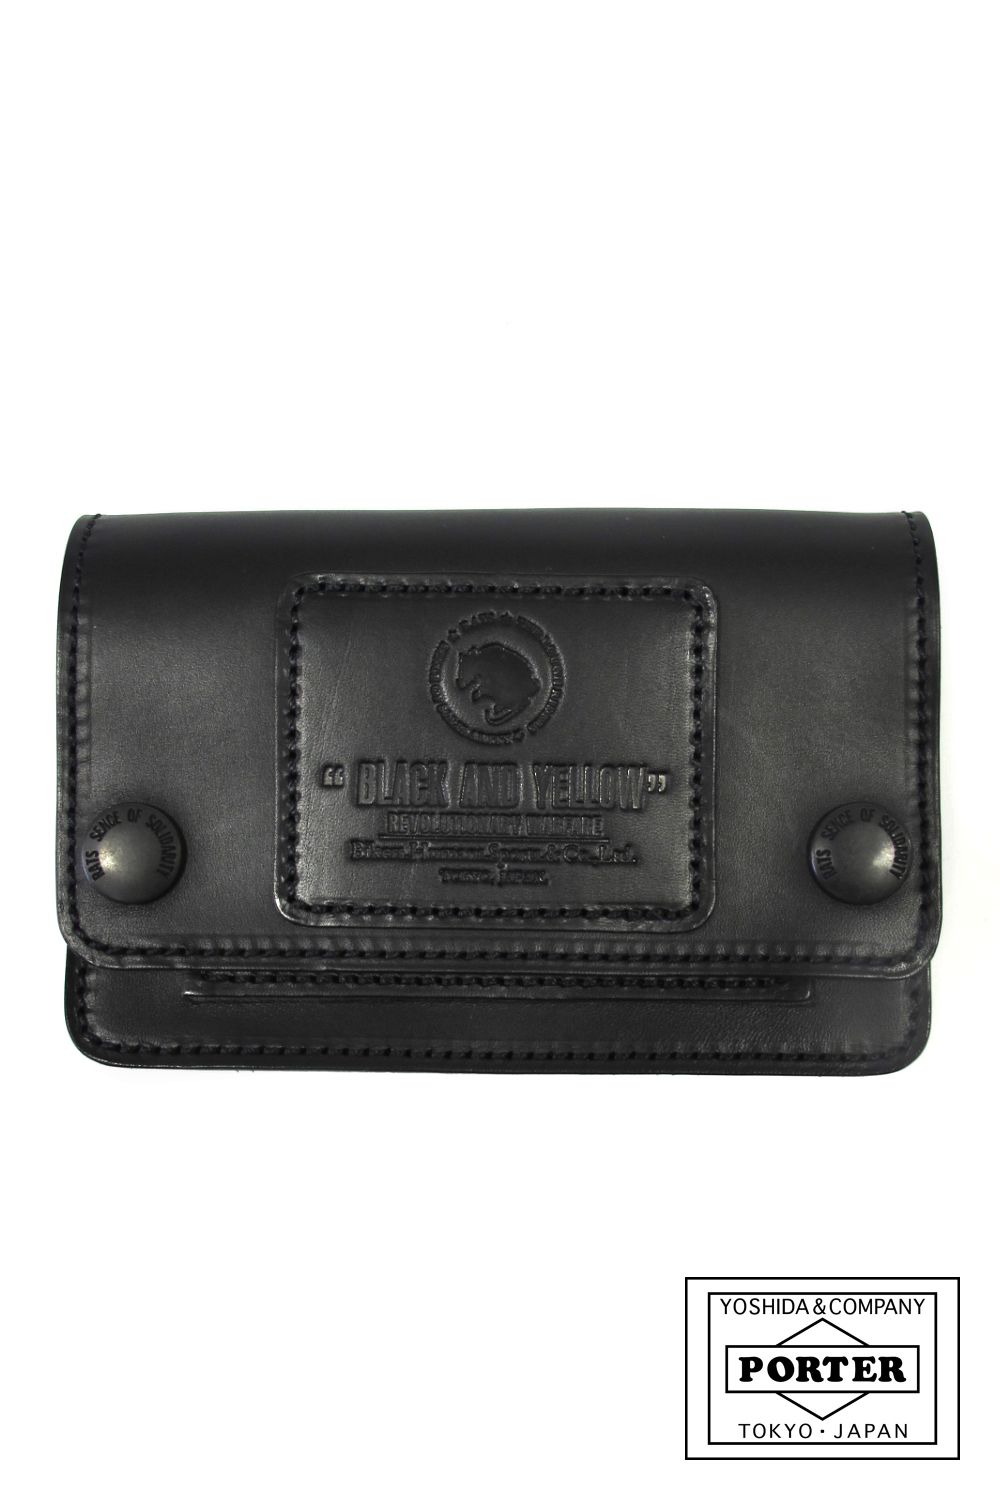 RATS - LEATHER WALLET (BLACK) / ポーター コラボレザーウォレット